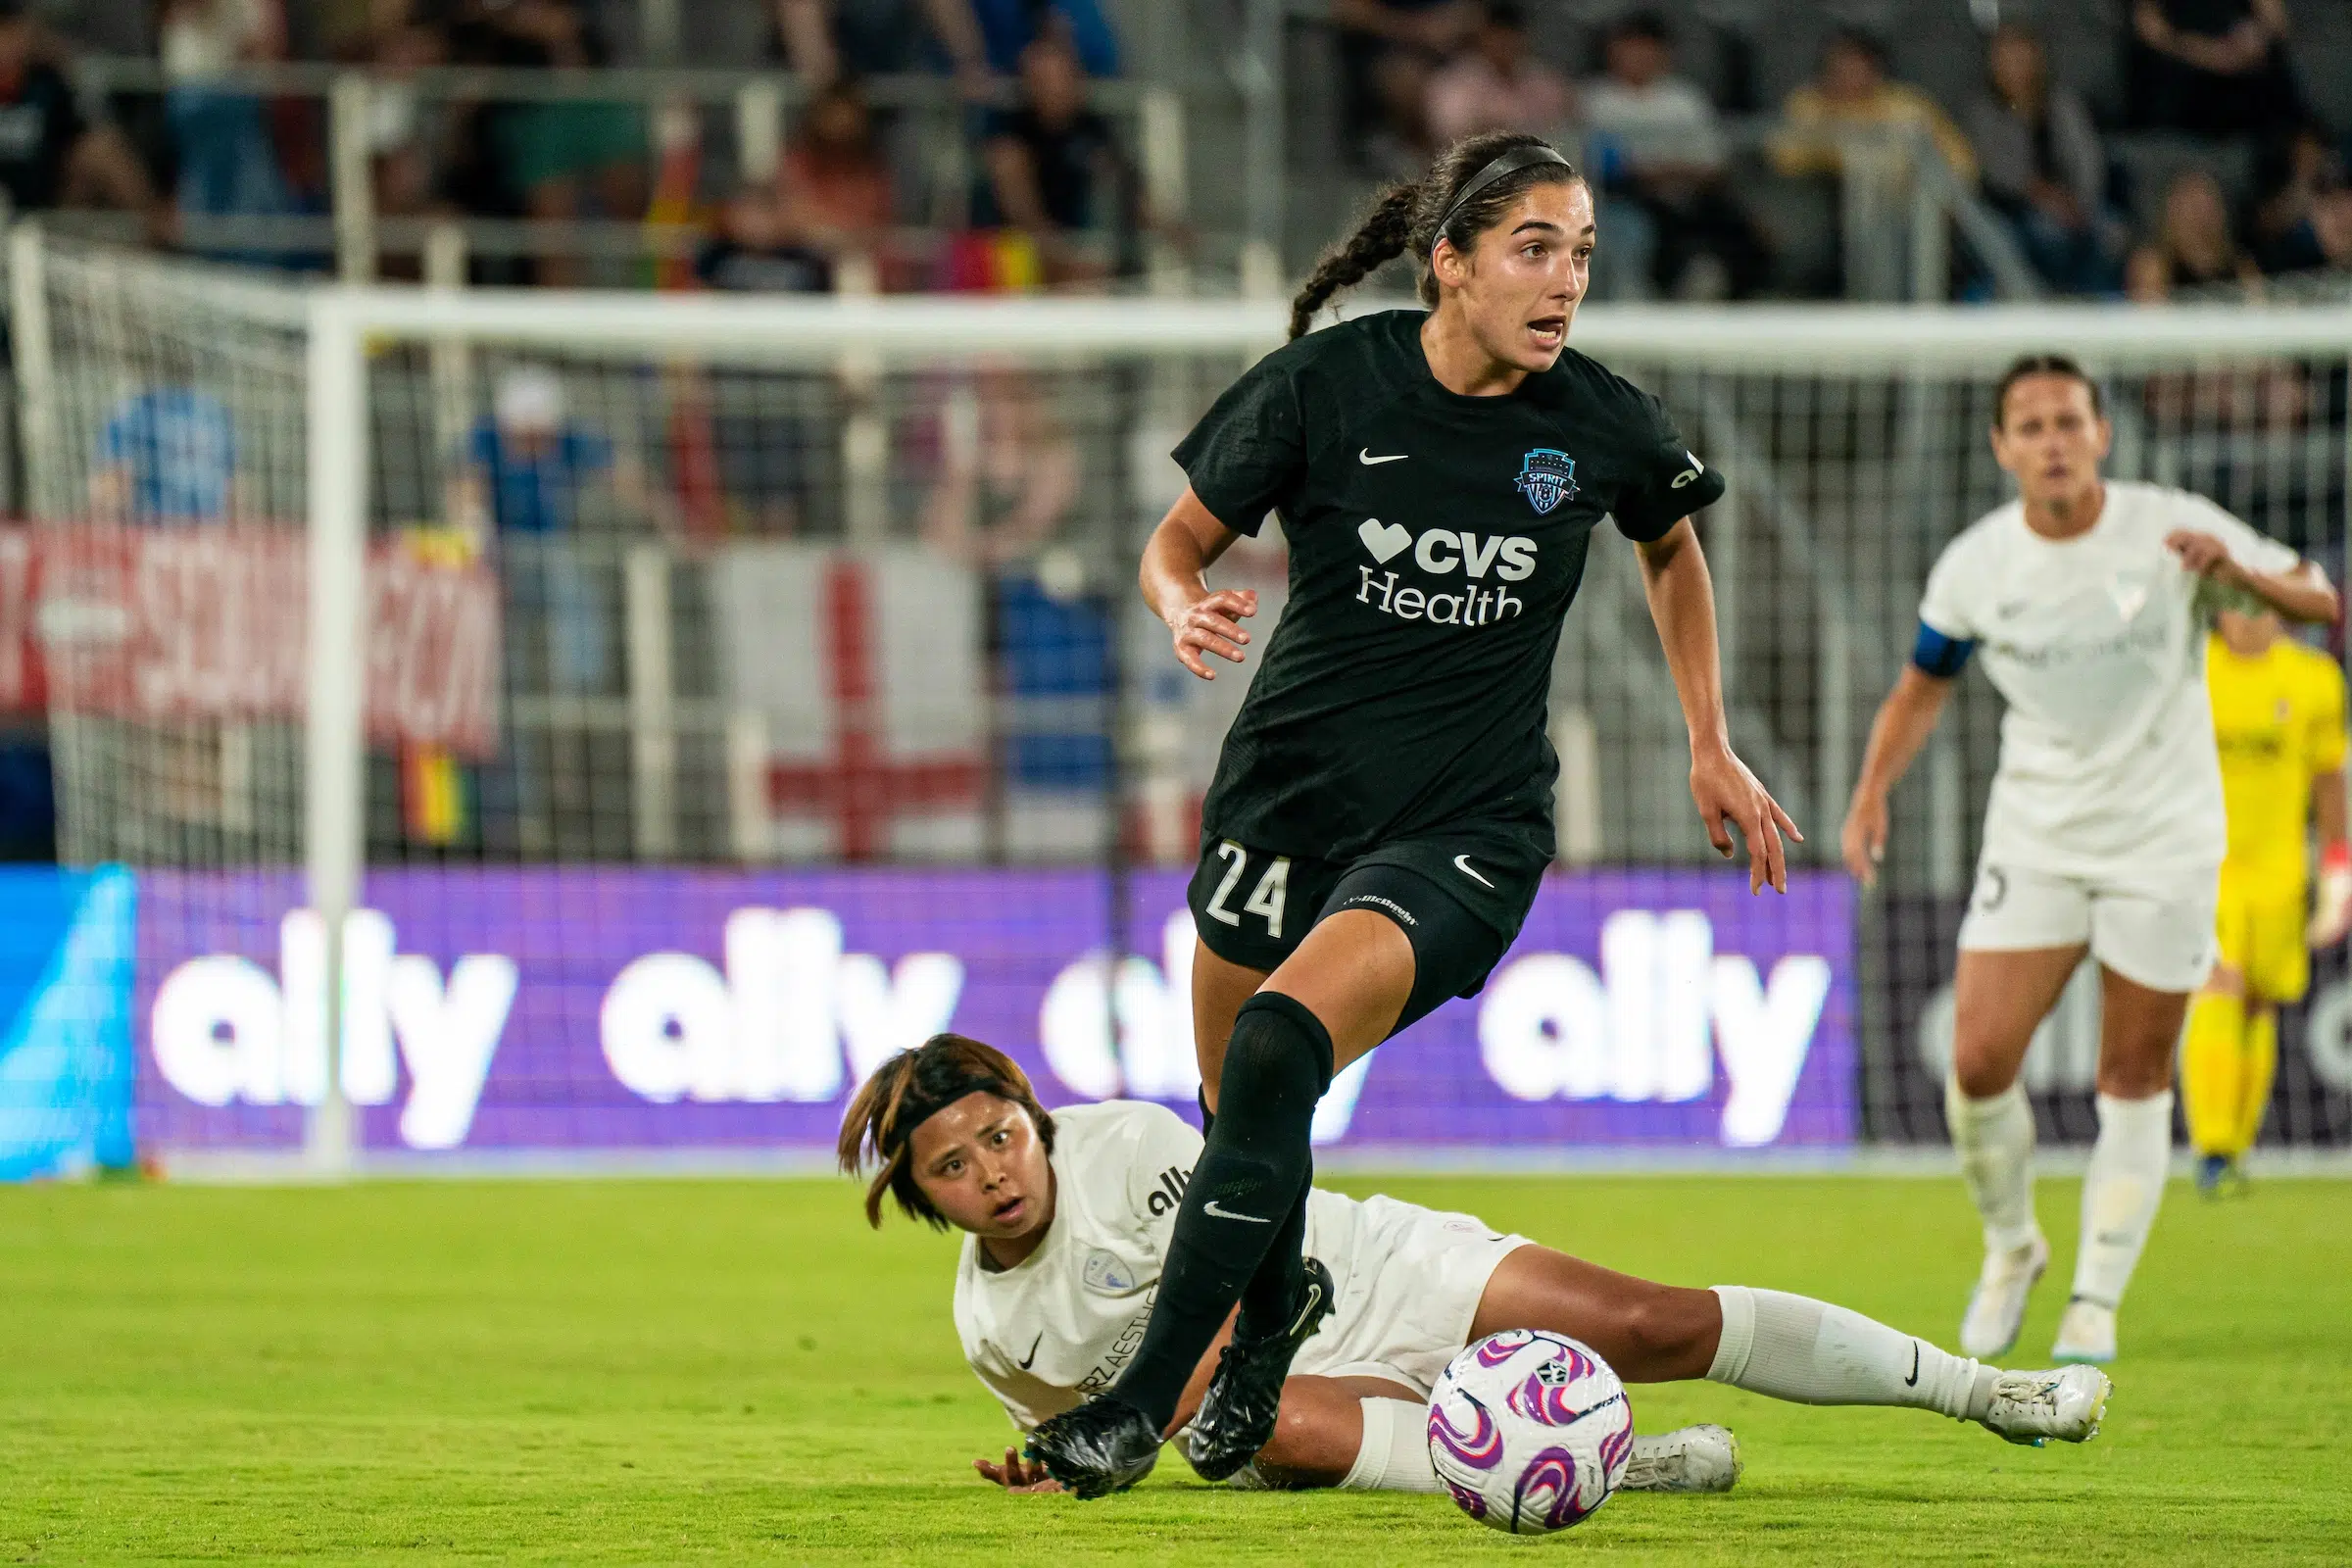 Lena Silano in a black uniform dribbles the soccer ball past a defender in a white uniform who is lying on the ground.